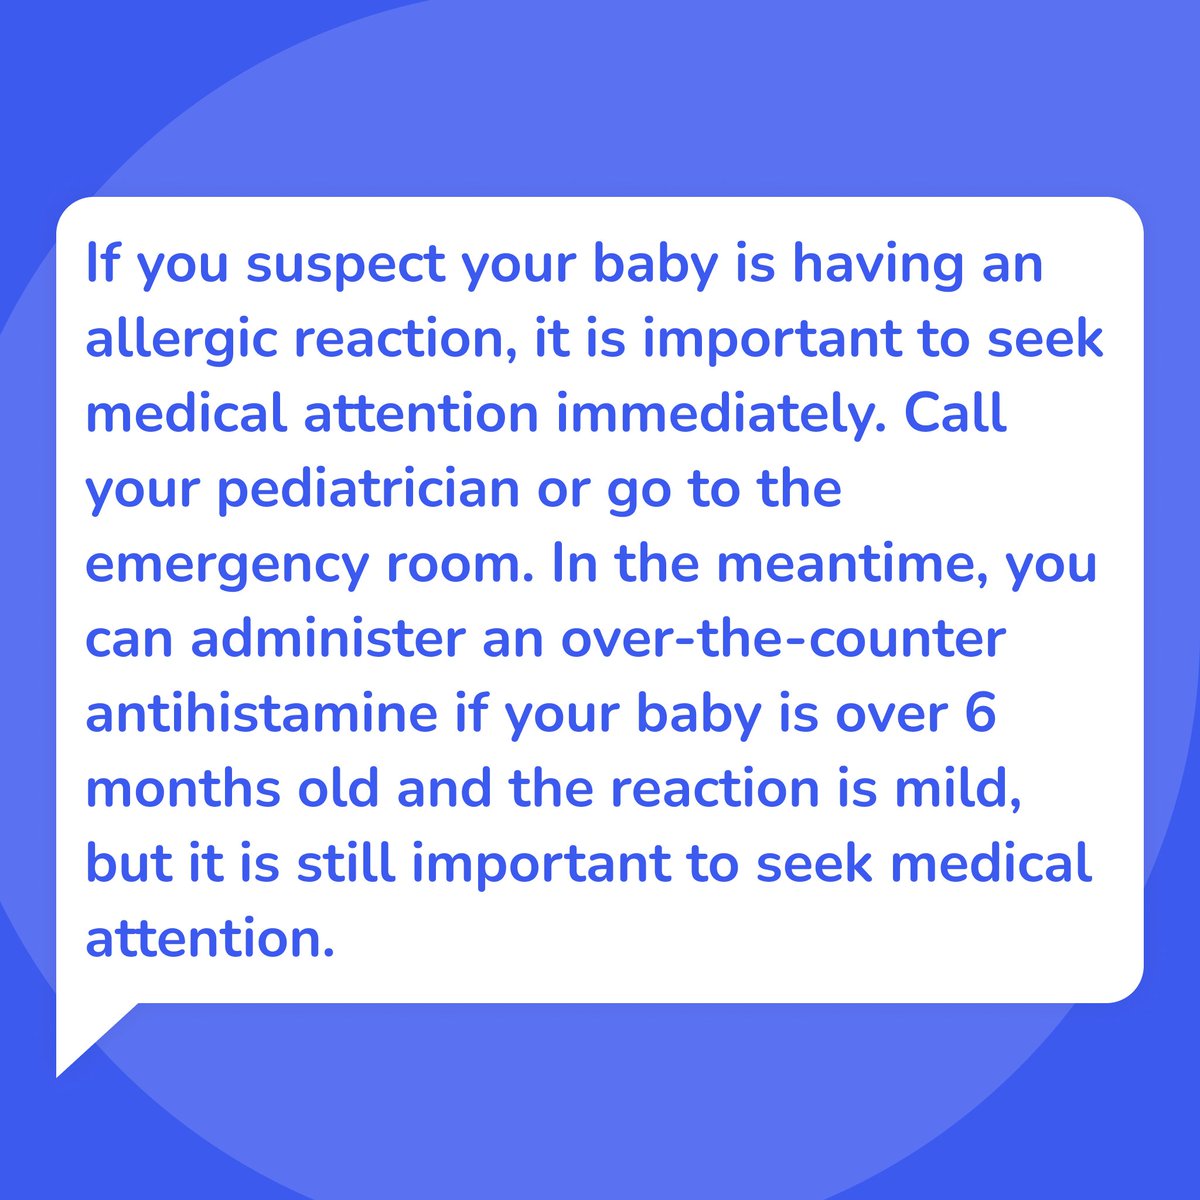 If you suspect your baby is having an allergic reaction, don't wait! Seek medical attention immediately. #allergicreaction #babyhealth #medicalemergency #allergicreaction #babyhealth #medicalemergency